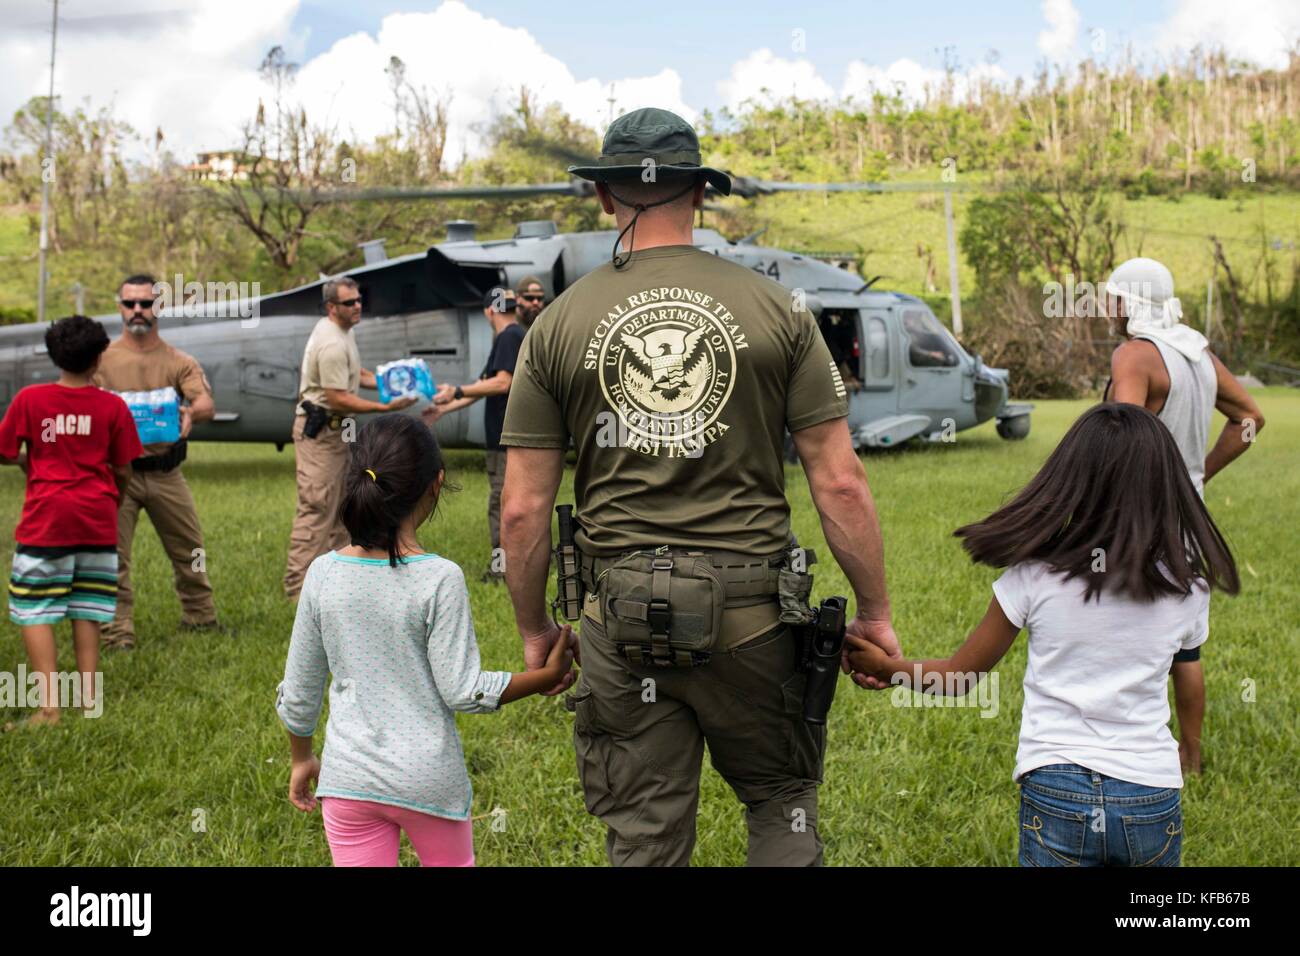 A U.S. Department of Homeland Security officer escorts two Puerto Rican children to a U.S. Navy MH-60S Seahawk helicopter for emergency supplies during relief efforts in the aftermath of Hurricane Maria October 14, 2017 in San Salvador, Puerto Rico.   (photo by Jacob Andrew Goff via Planetpix) Stock Photo